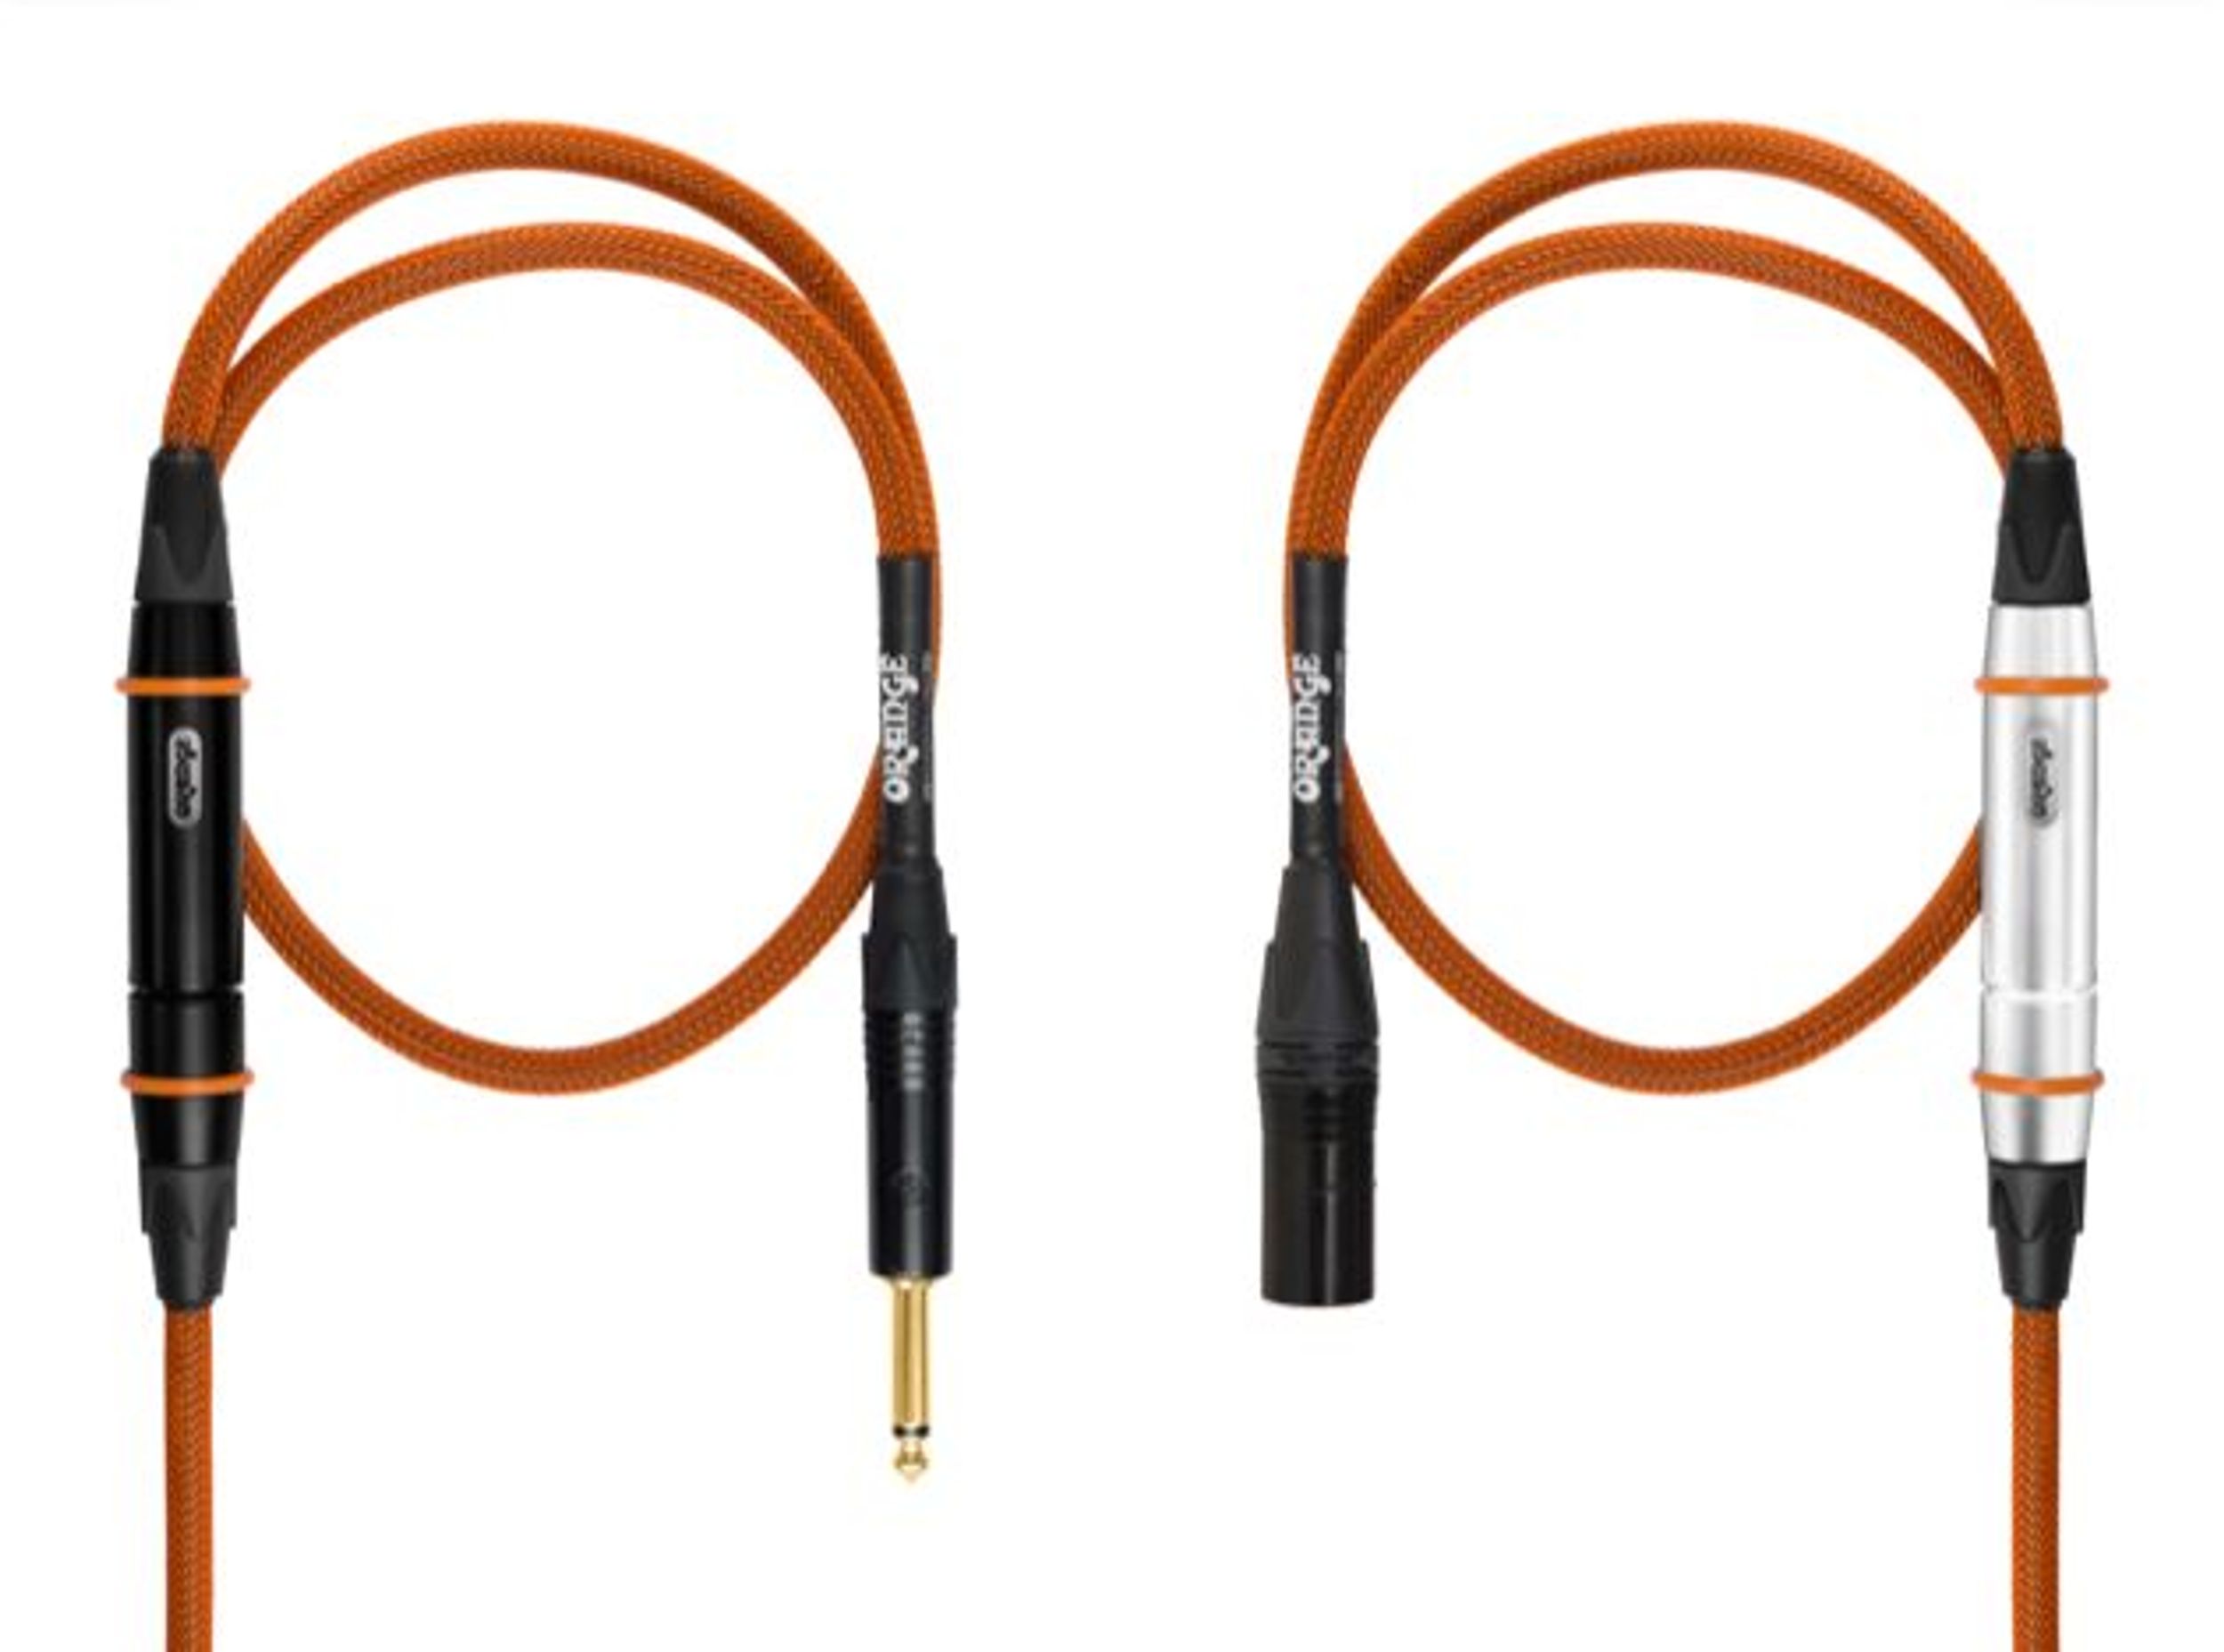 Orange Amplifiers Announces OB1 Bass Amps, Crush Series, and Orange Twister Cable